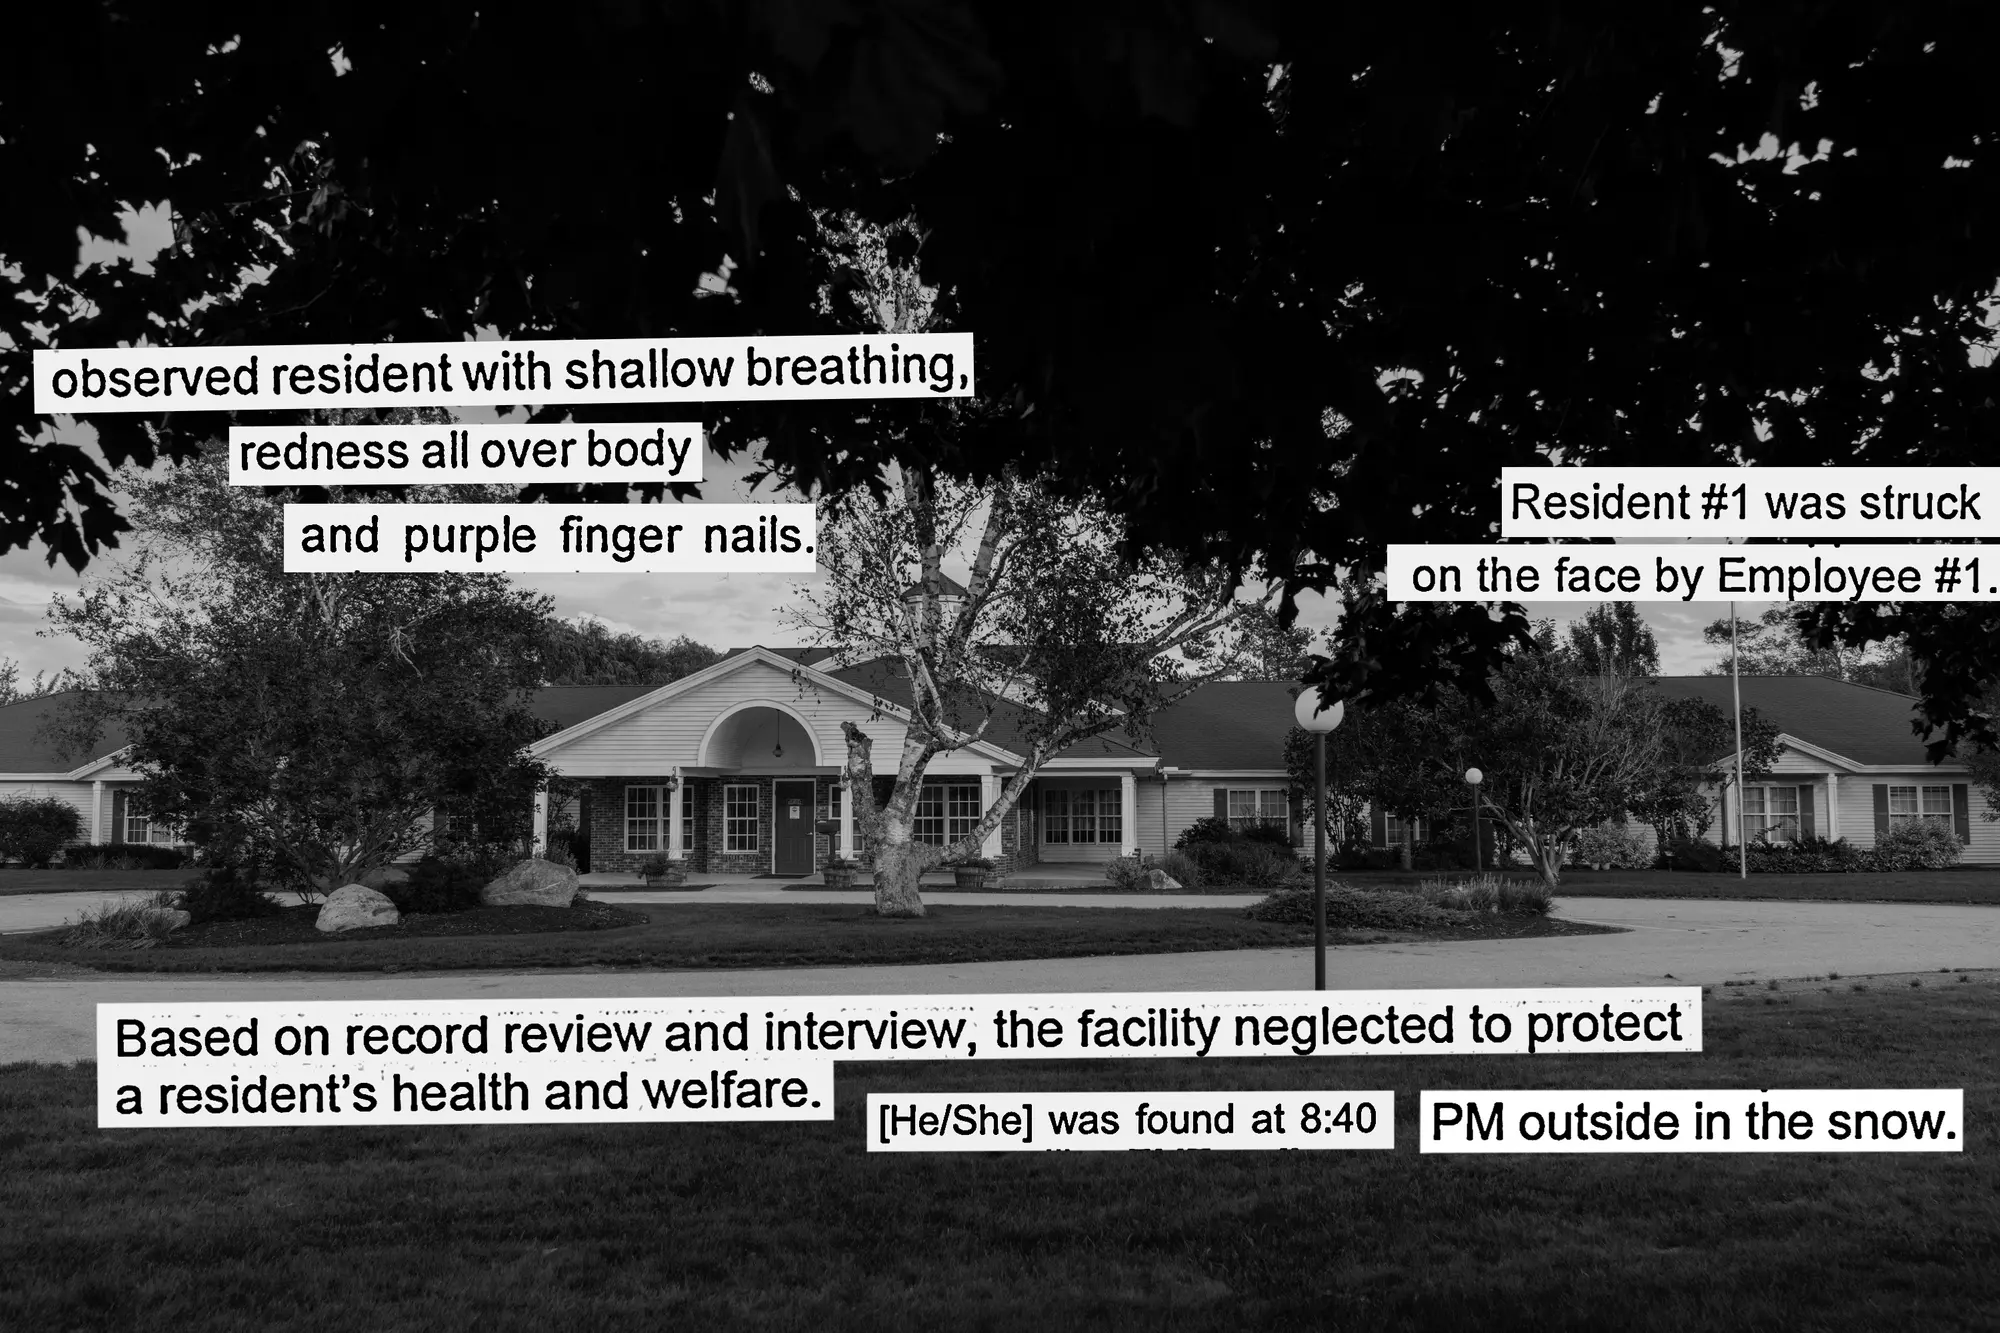 Maine Rarely Sanctions Residential Care Facilities Even After Severe Abuse or Neglect Incidents (propublica.org)